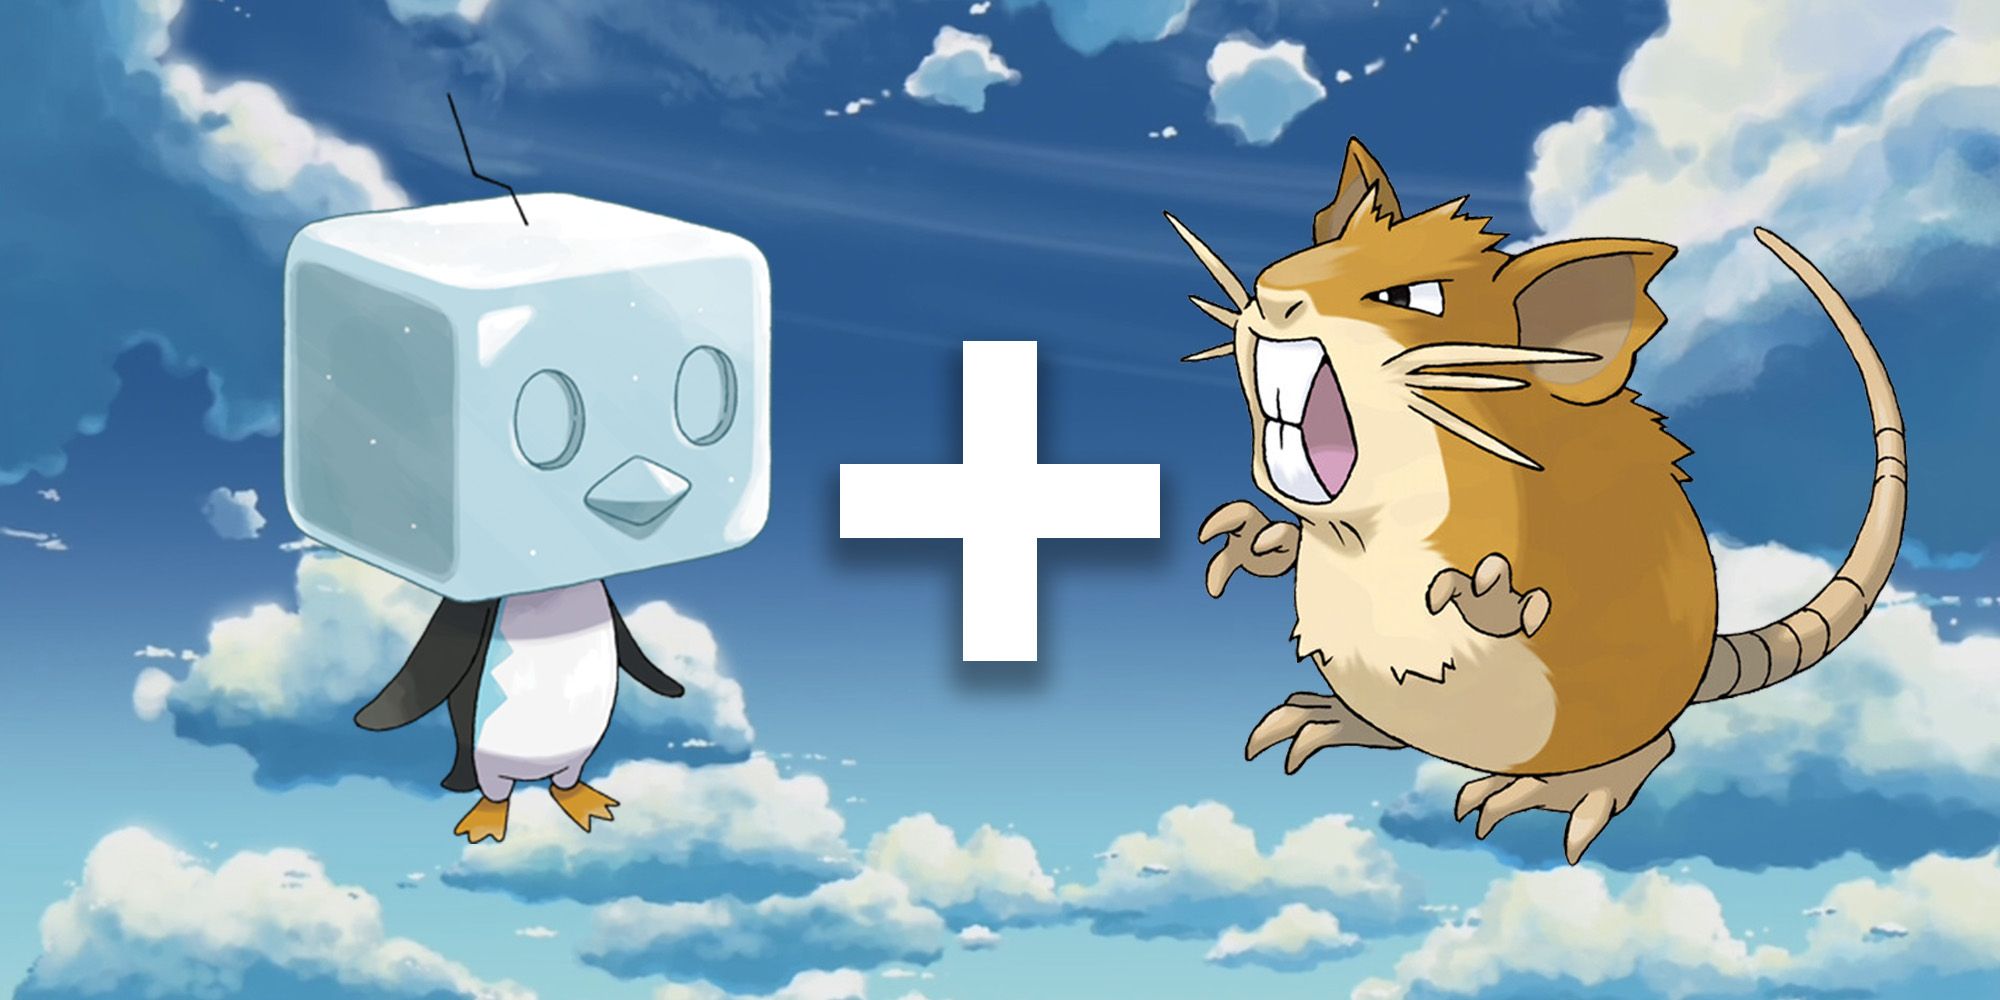 Eiscue and Radicate with a plus symbol between them on a cloudy sky background, representing Pokémon's unused Ice/Normal type combo.